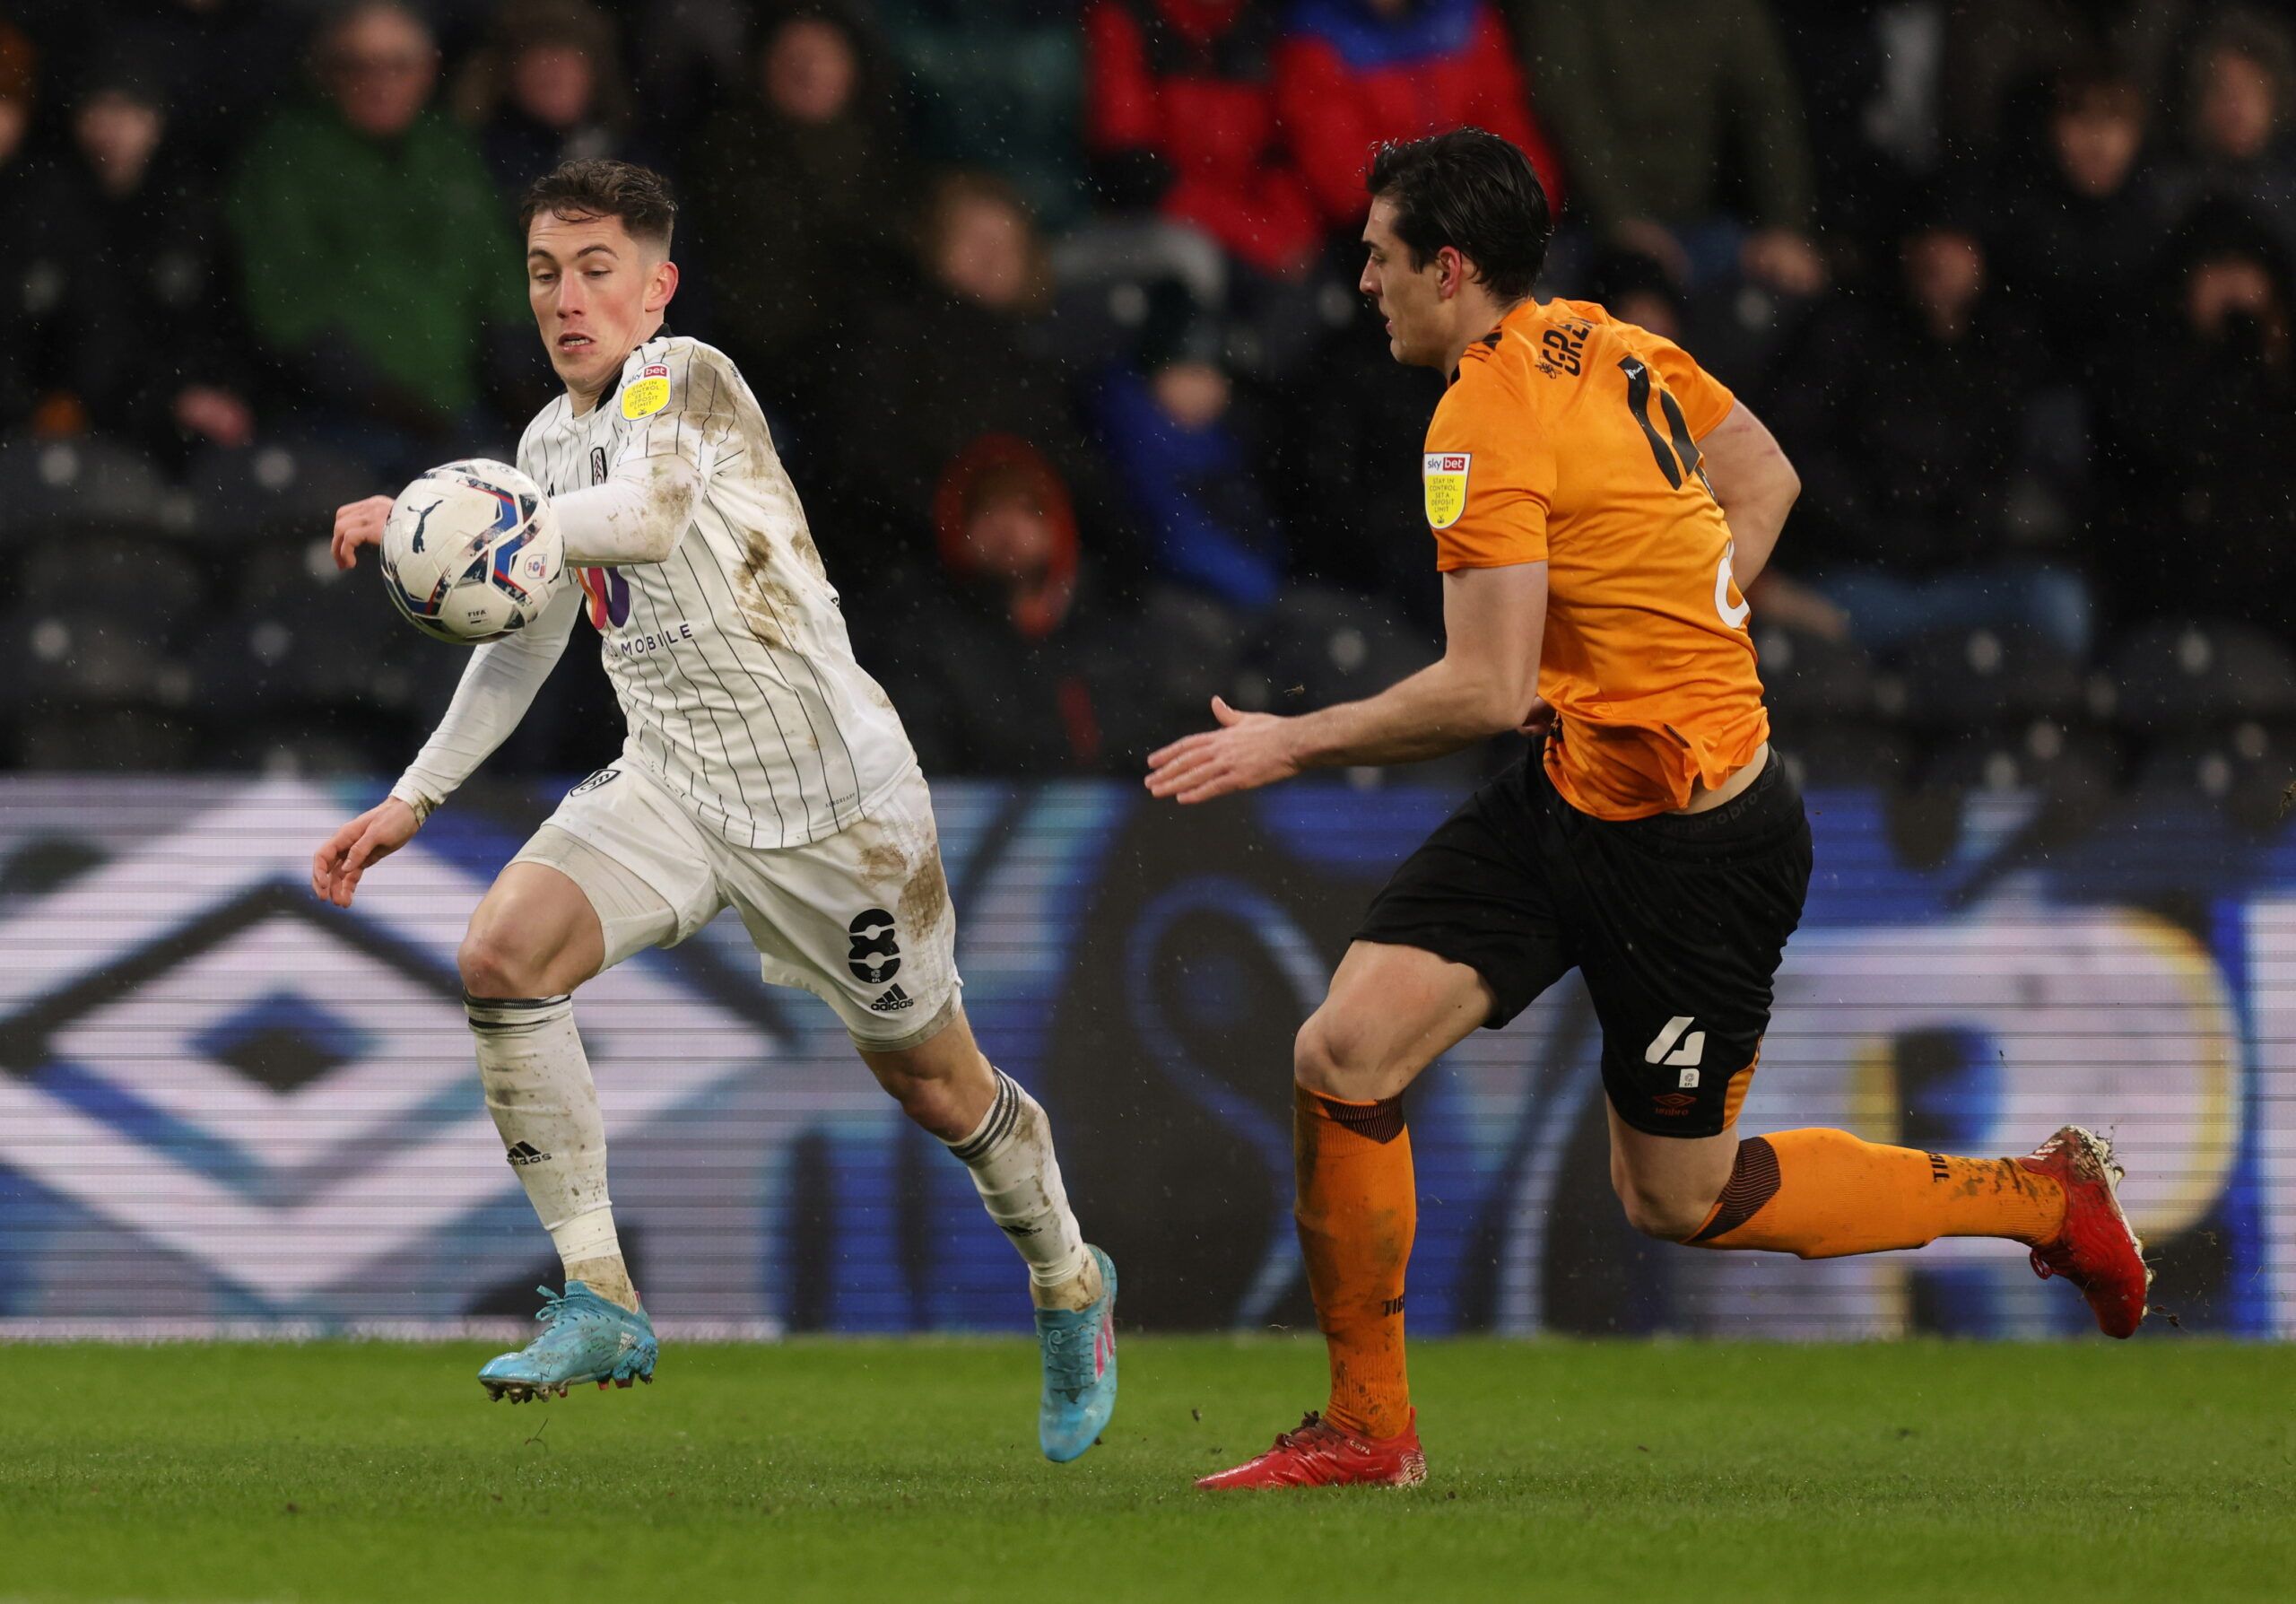 Soccer Football - Championship - Hull City v Fulham - KCOM Stadium, Hull, Britain - February 12, 2022  Fulham's Harry Wilson in action with Hull City's Jacob Greaves  Action Images/John Clifton  EDITORIAL USE ONLY. No use with unauthorized audio, video, data, fixture lists, club/league logos or 